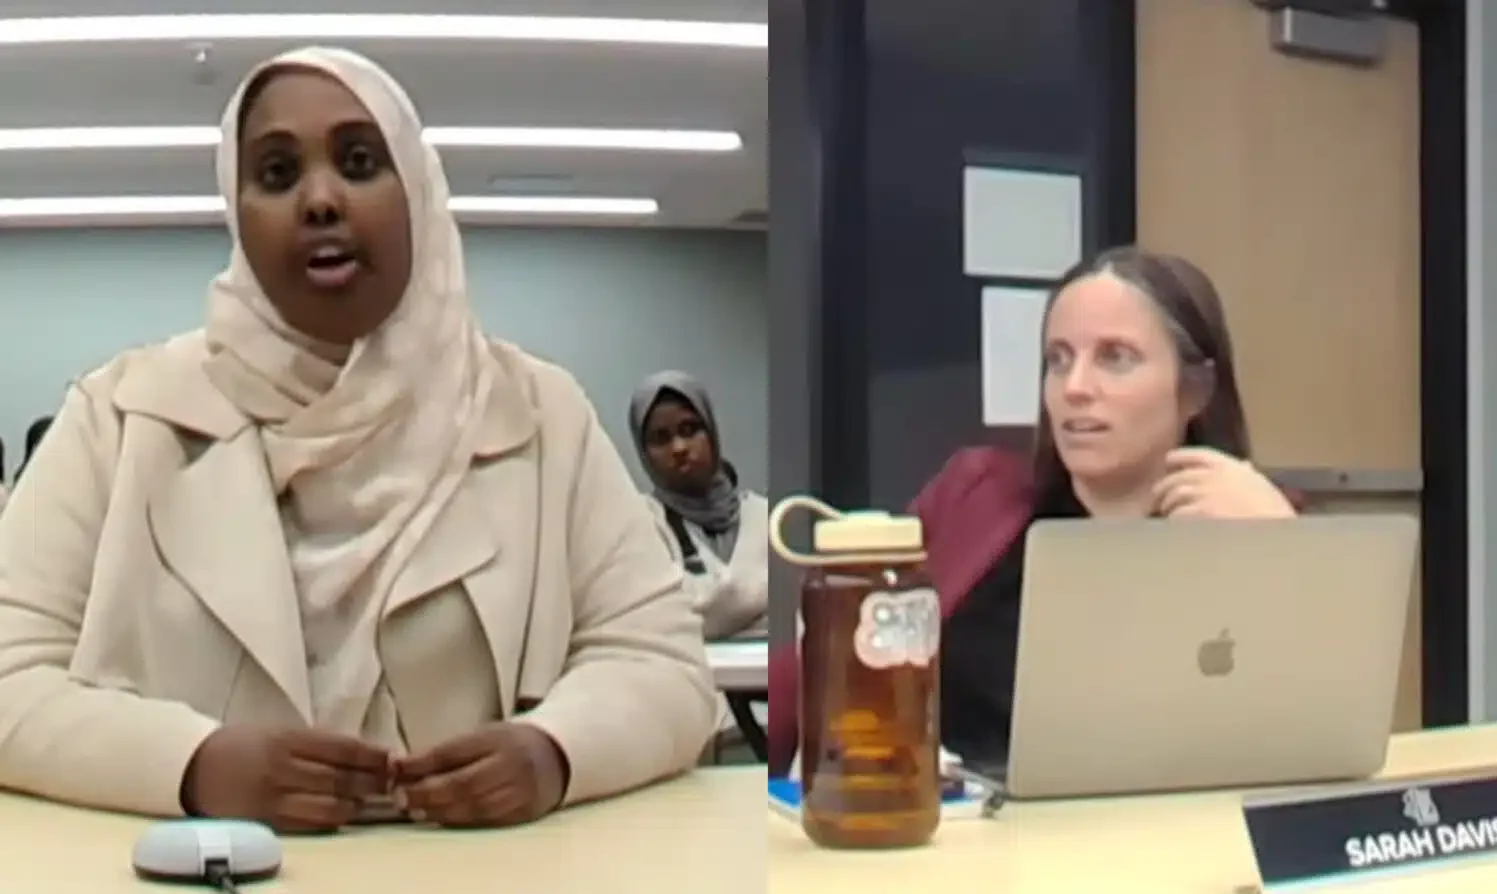 Featured image for “Minnesota School District Allows Muslim Families to Opt-Out of “Gender Identity” and Sexuality Curriculum”